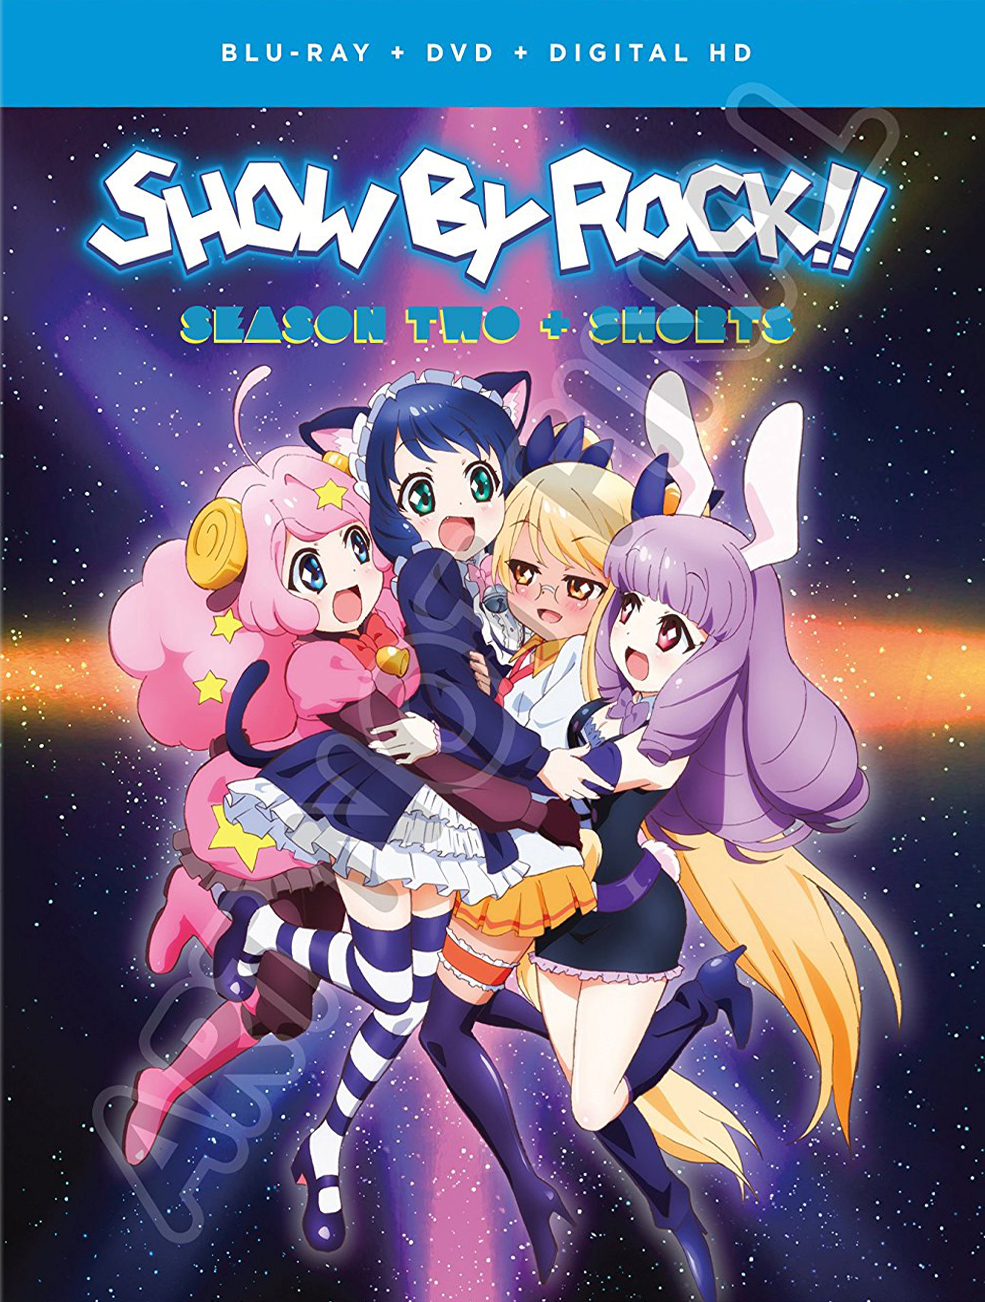 SHOW BY ROCK x Dotonbori promotional poster set of 2